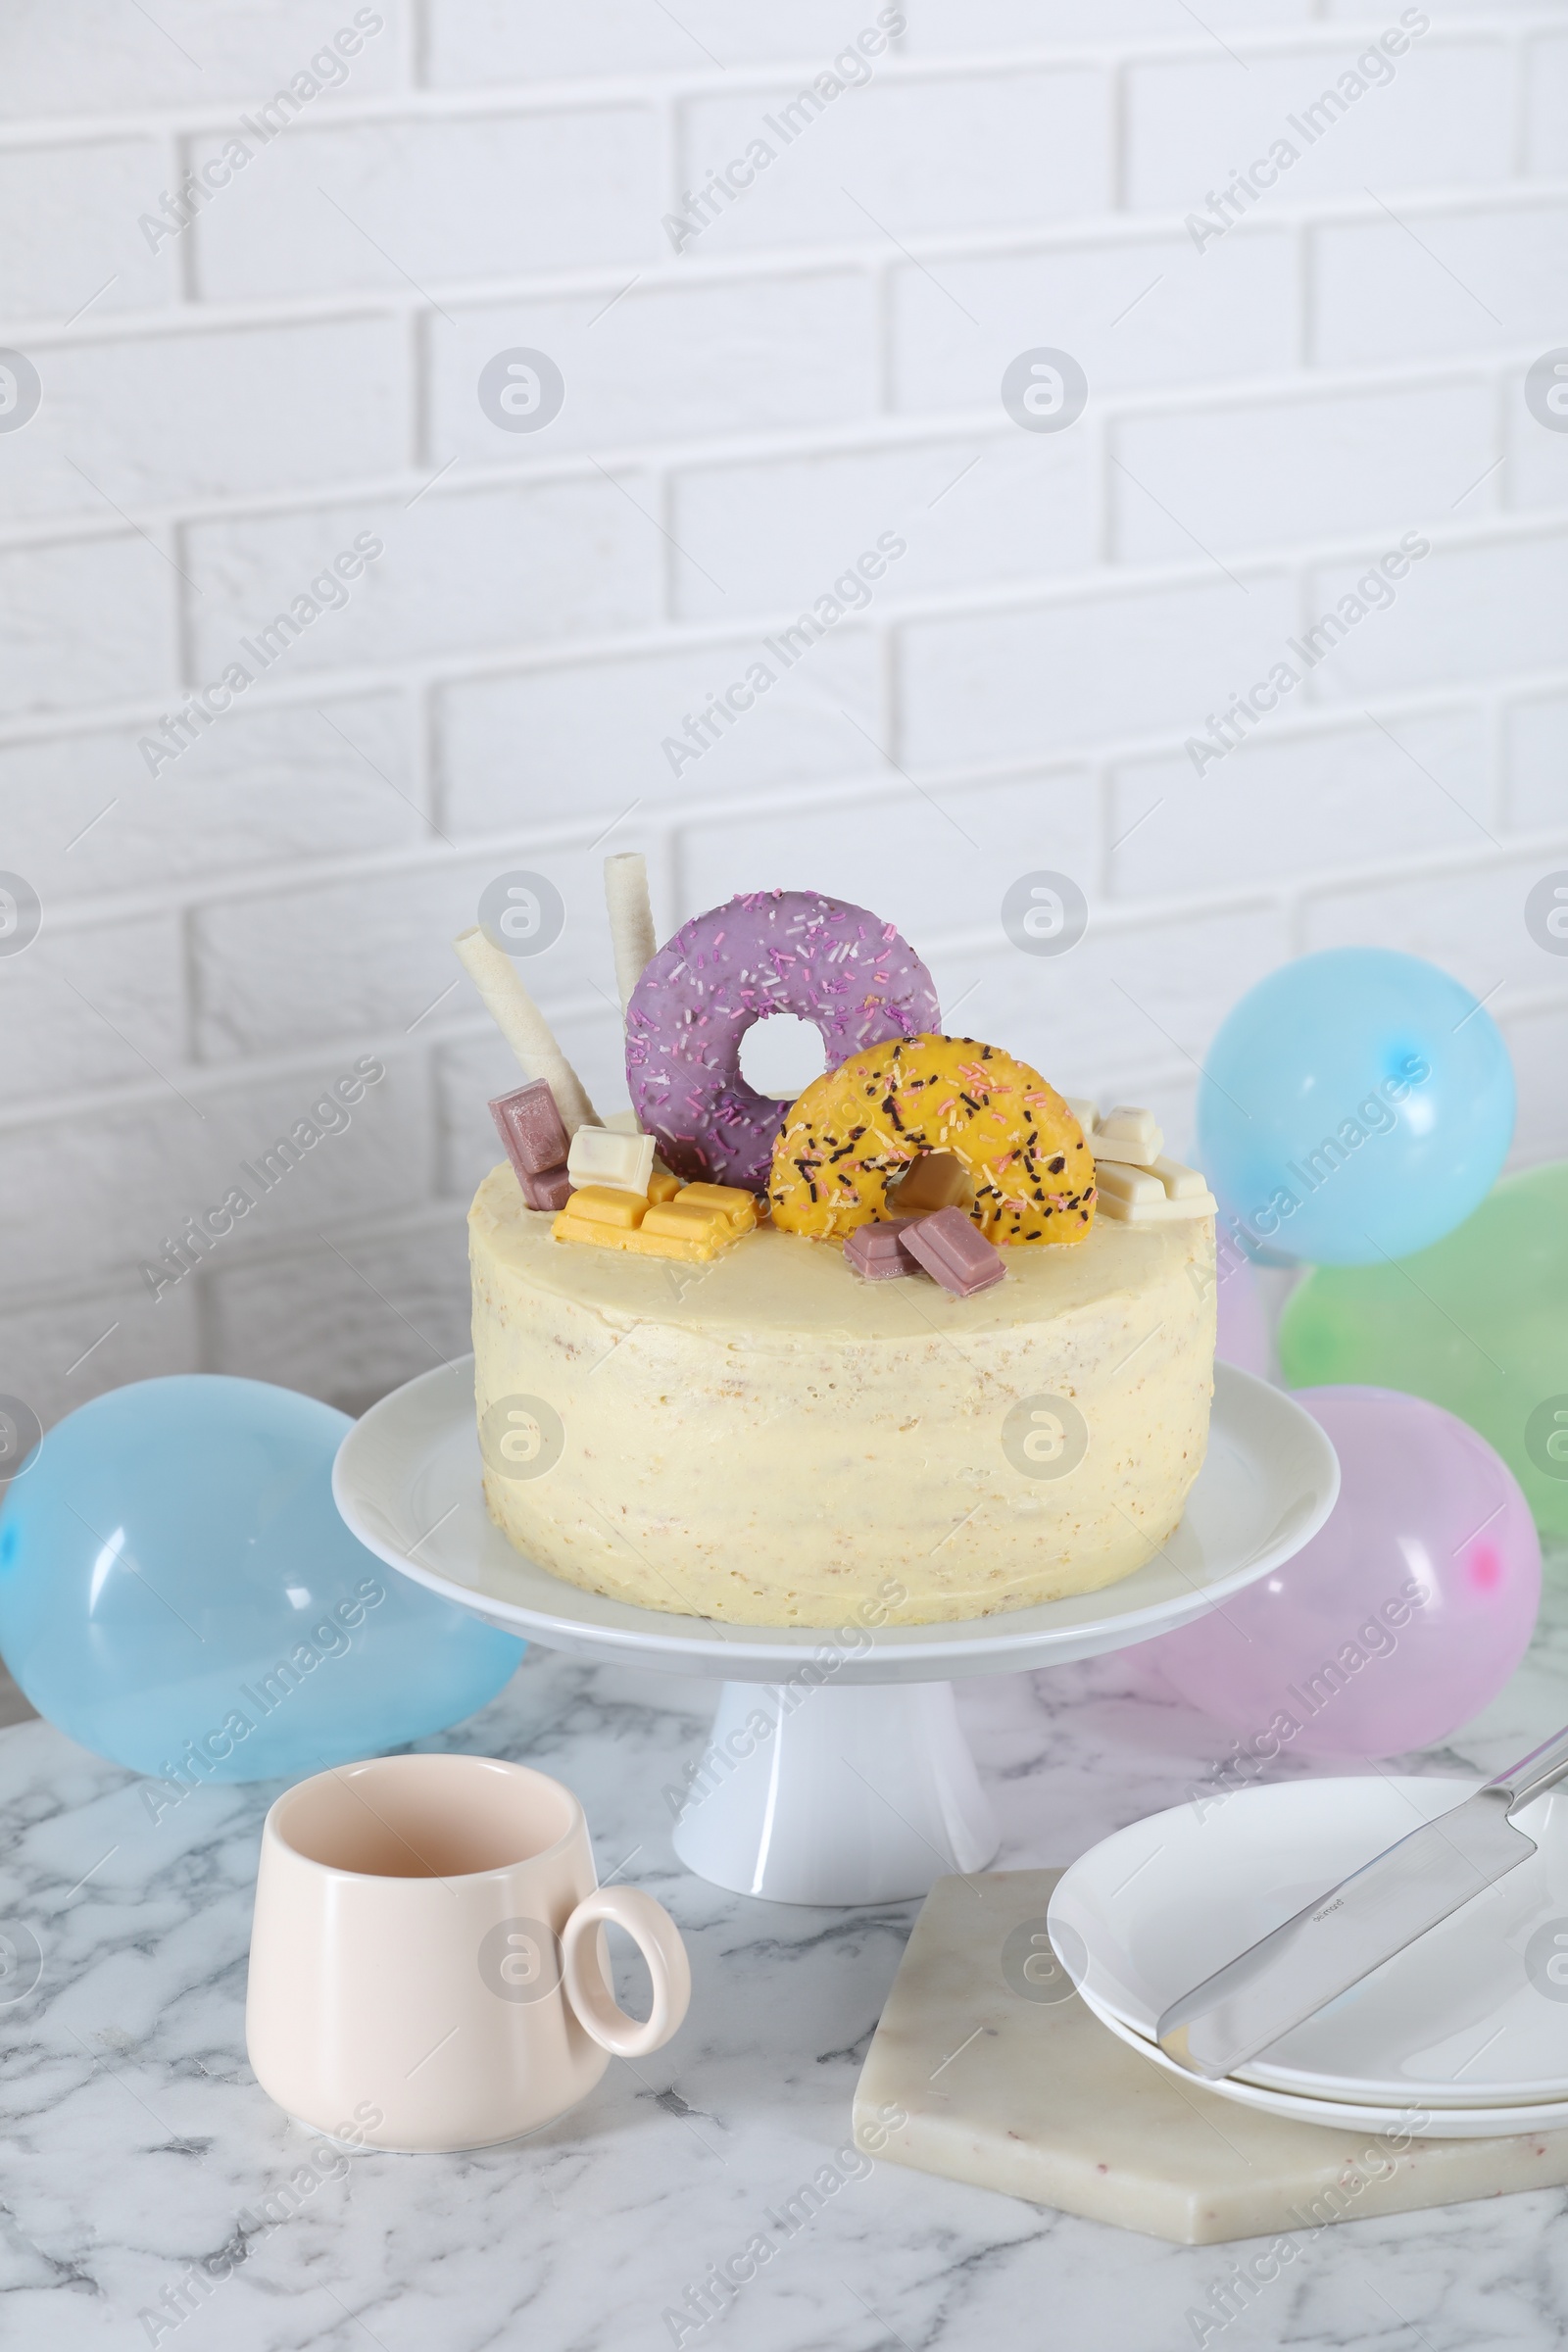 Photo of Delicious cake decorated with sweets, tableware and balloons on white marble table, space for text